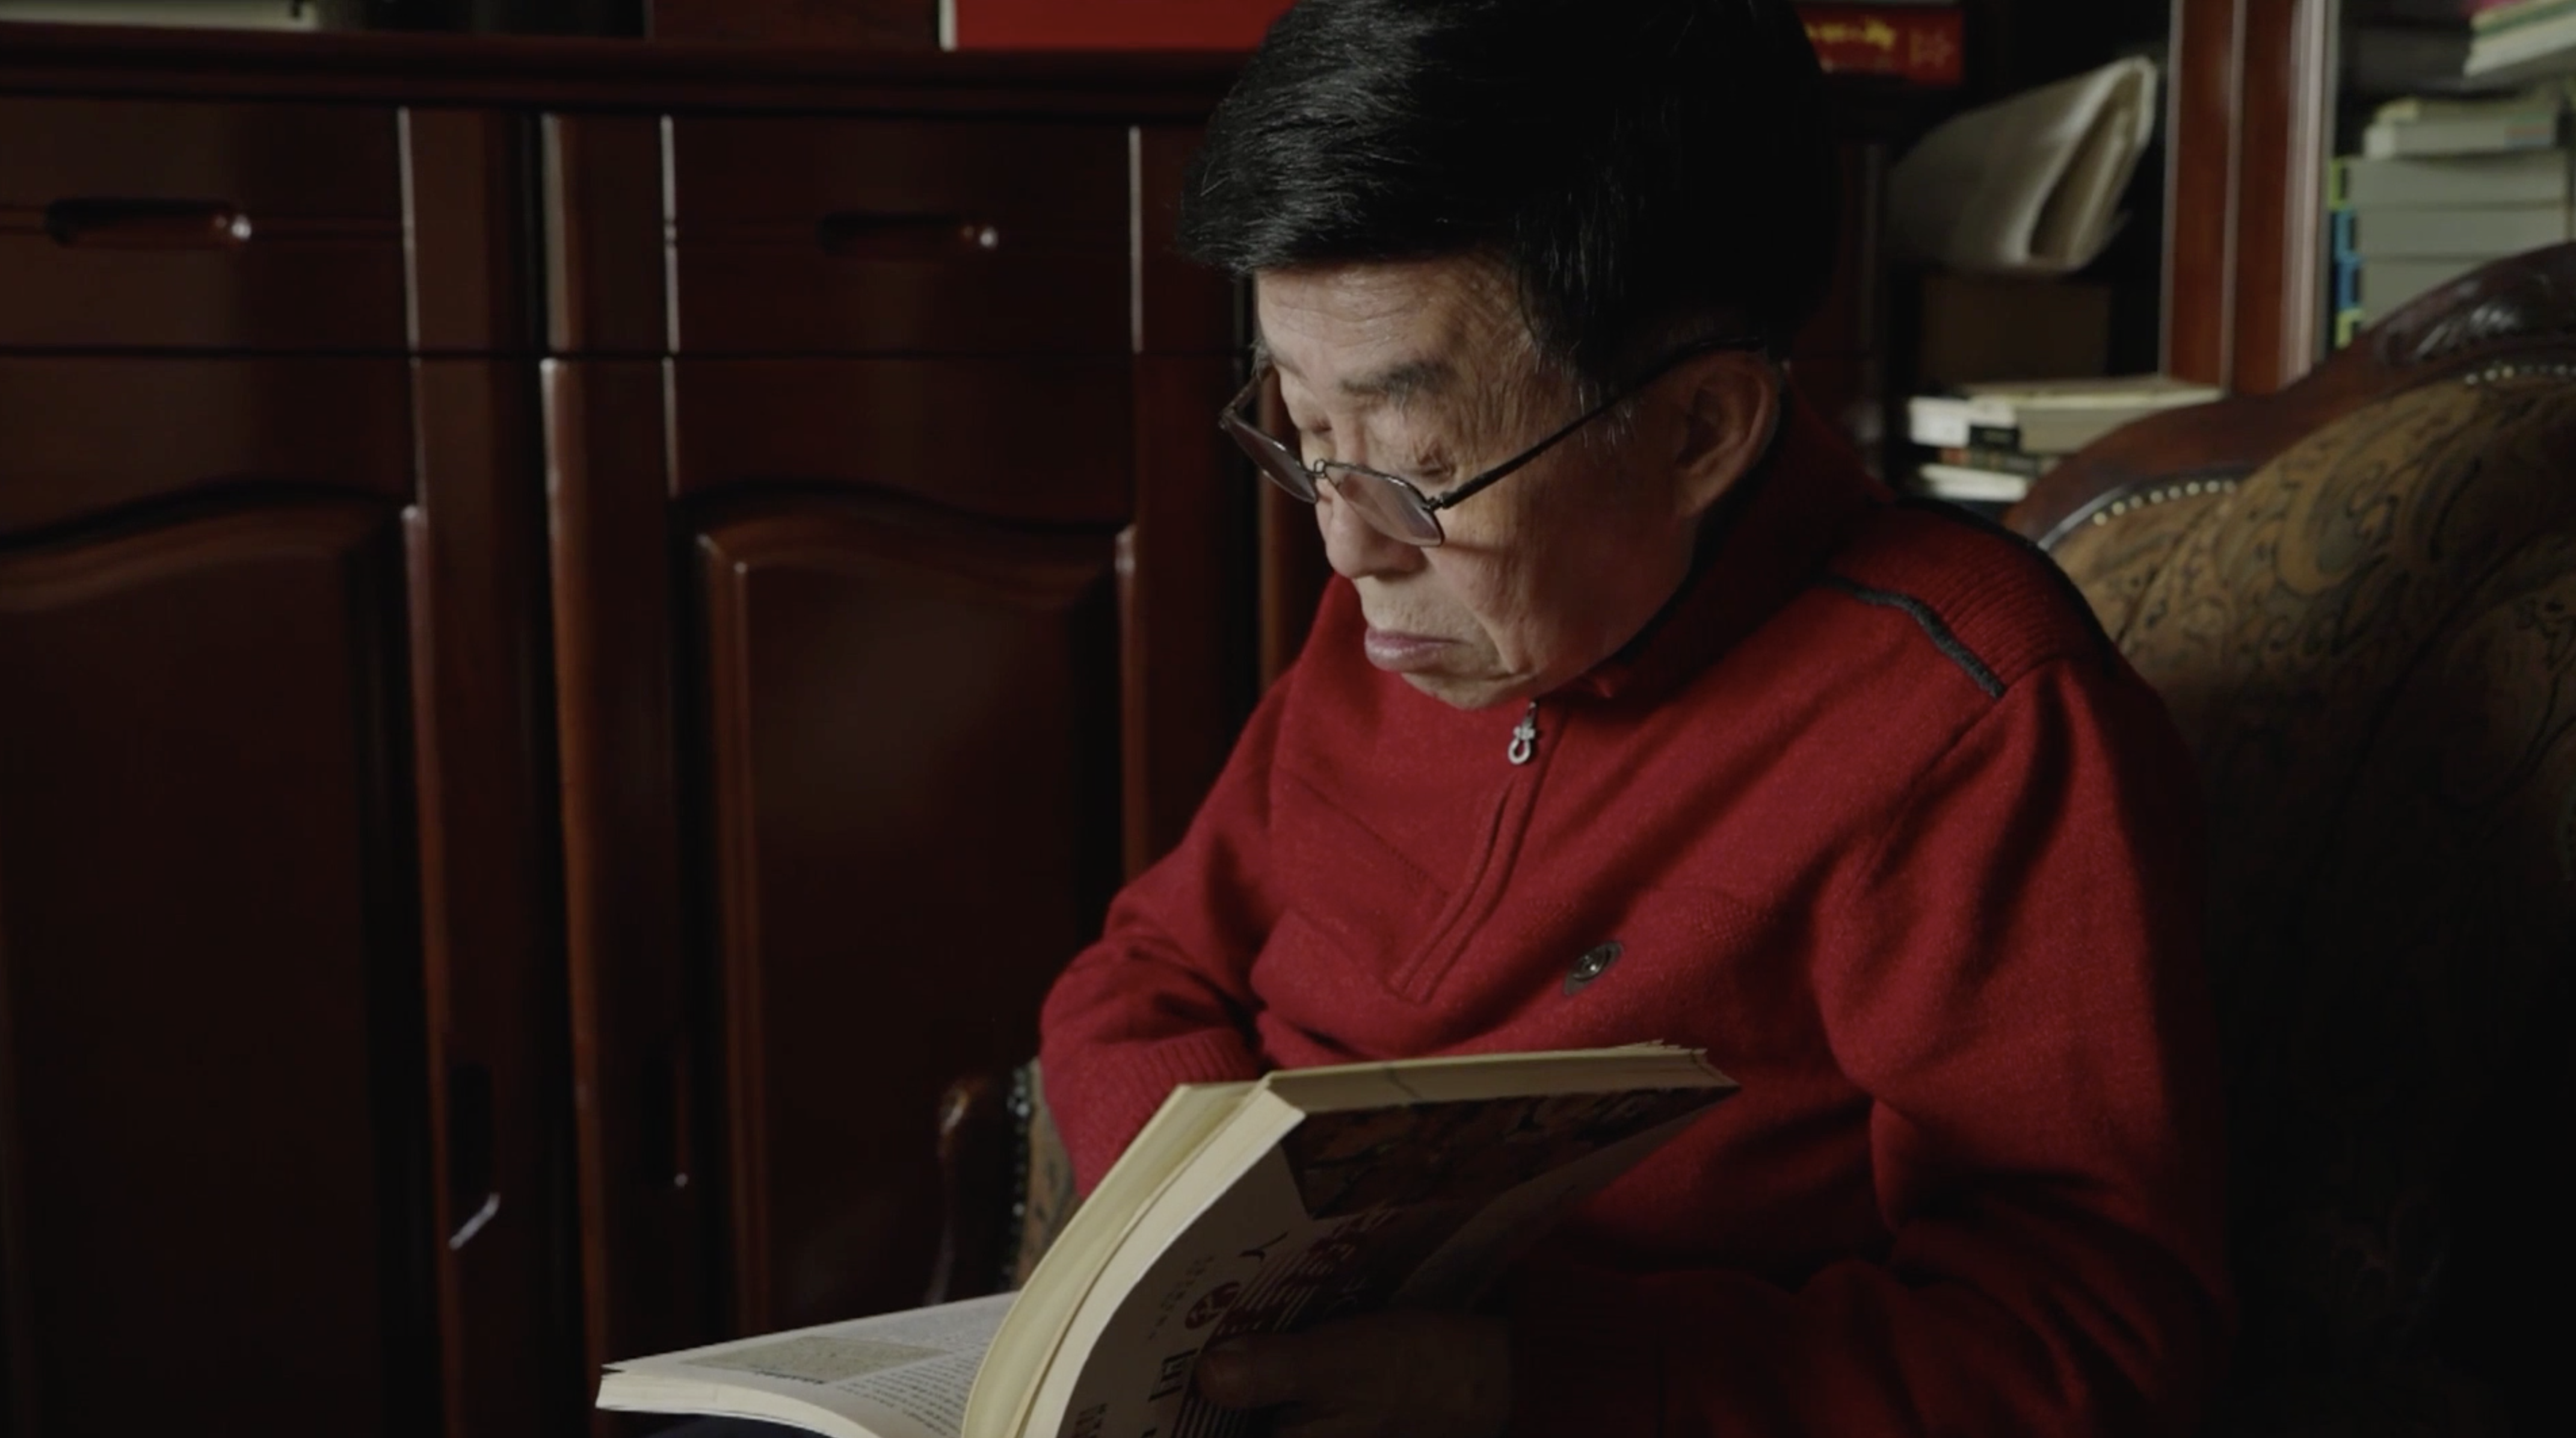 Tian Lianyuan consults materials for a 100-episode series on modern pingshu introducing the history of the Communist Party of China. /CGTN